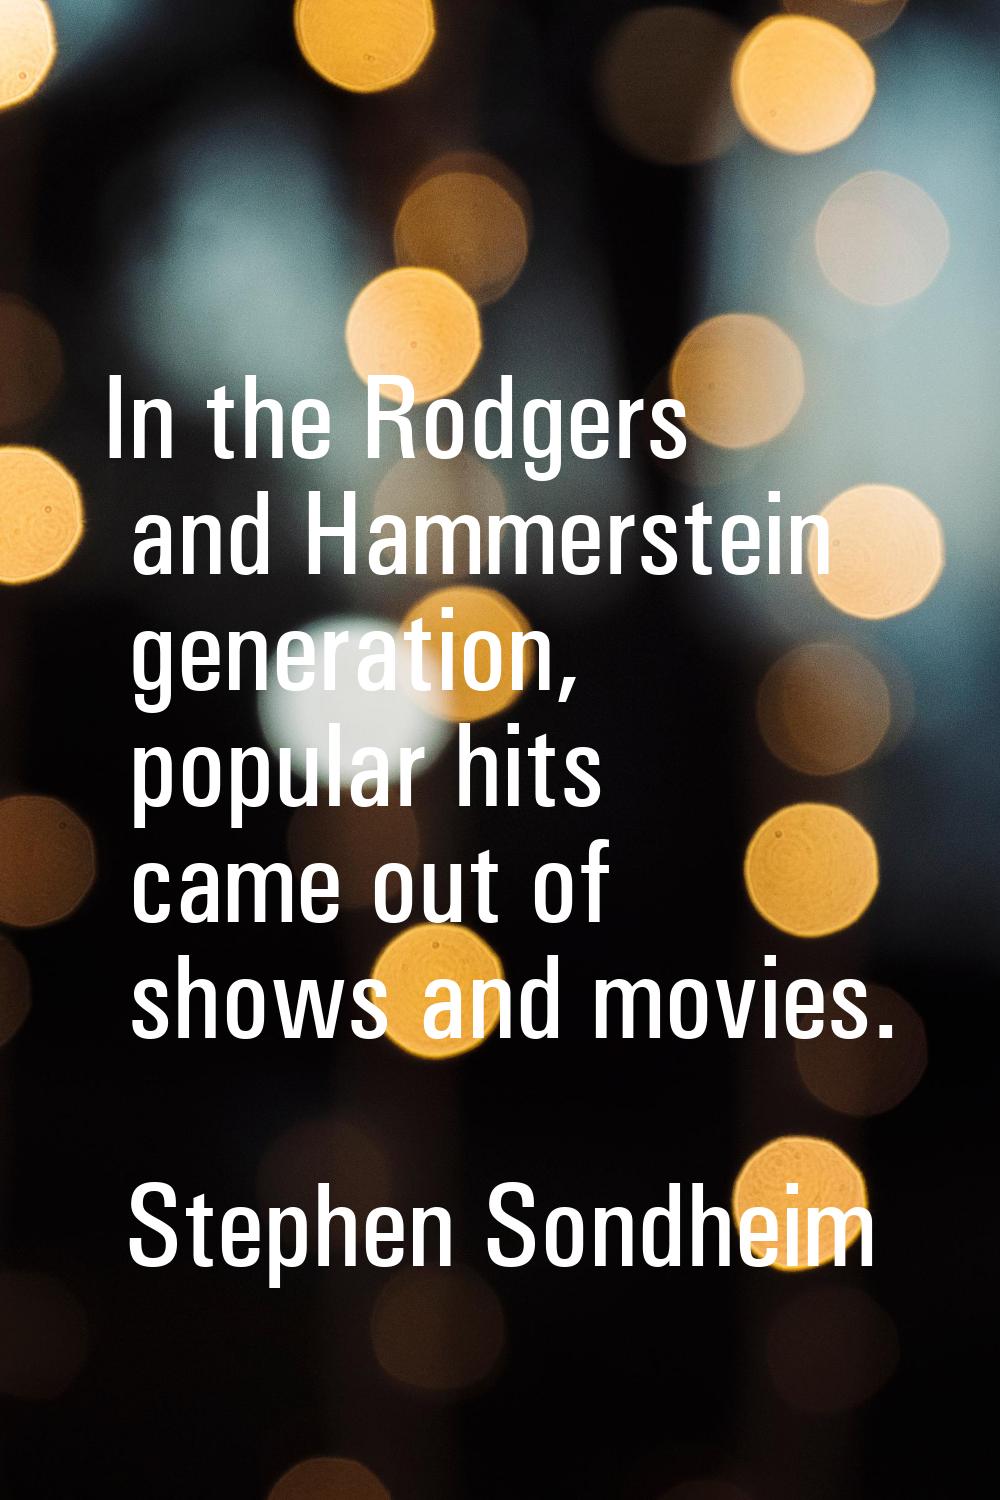 In the Rodgers and Hammerstein generation, popular hits came out of shows and movies.